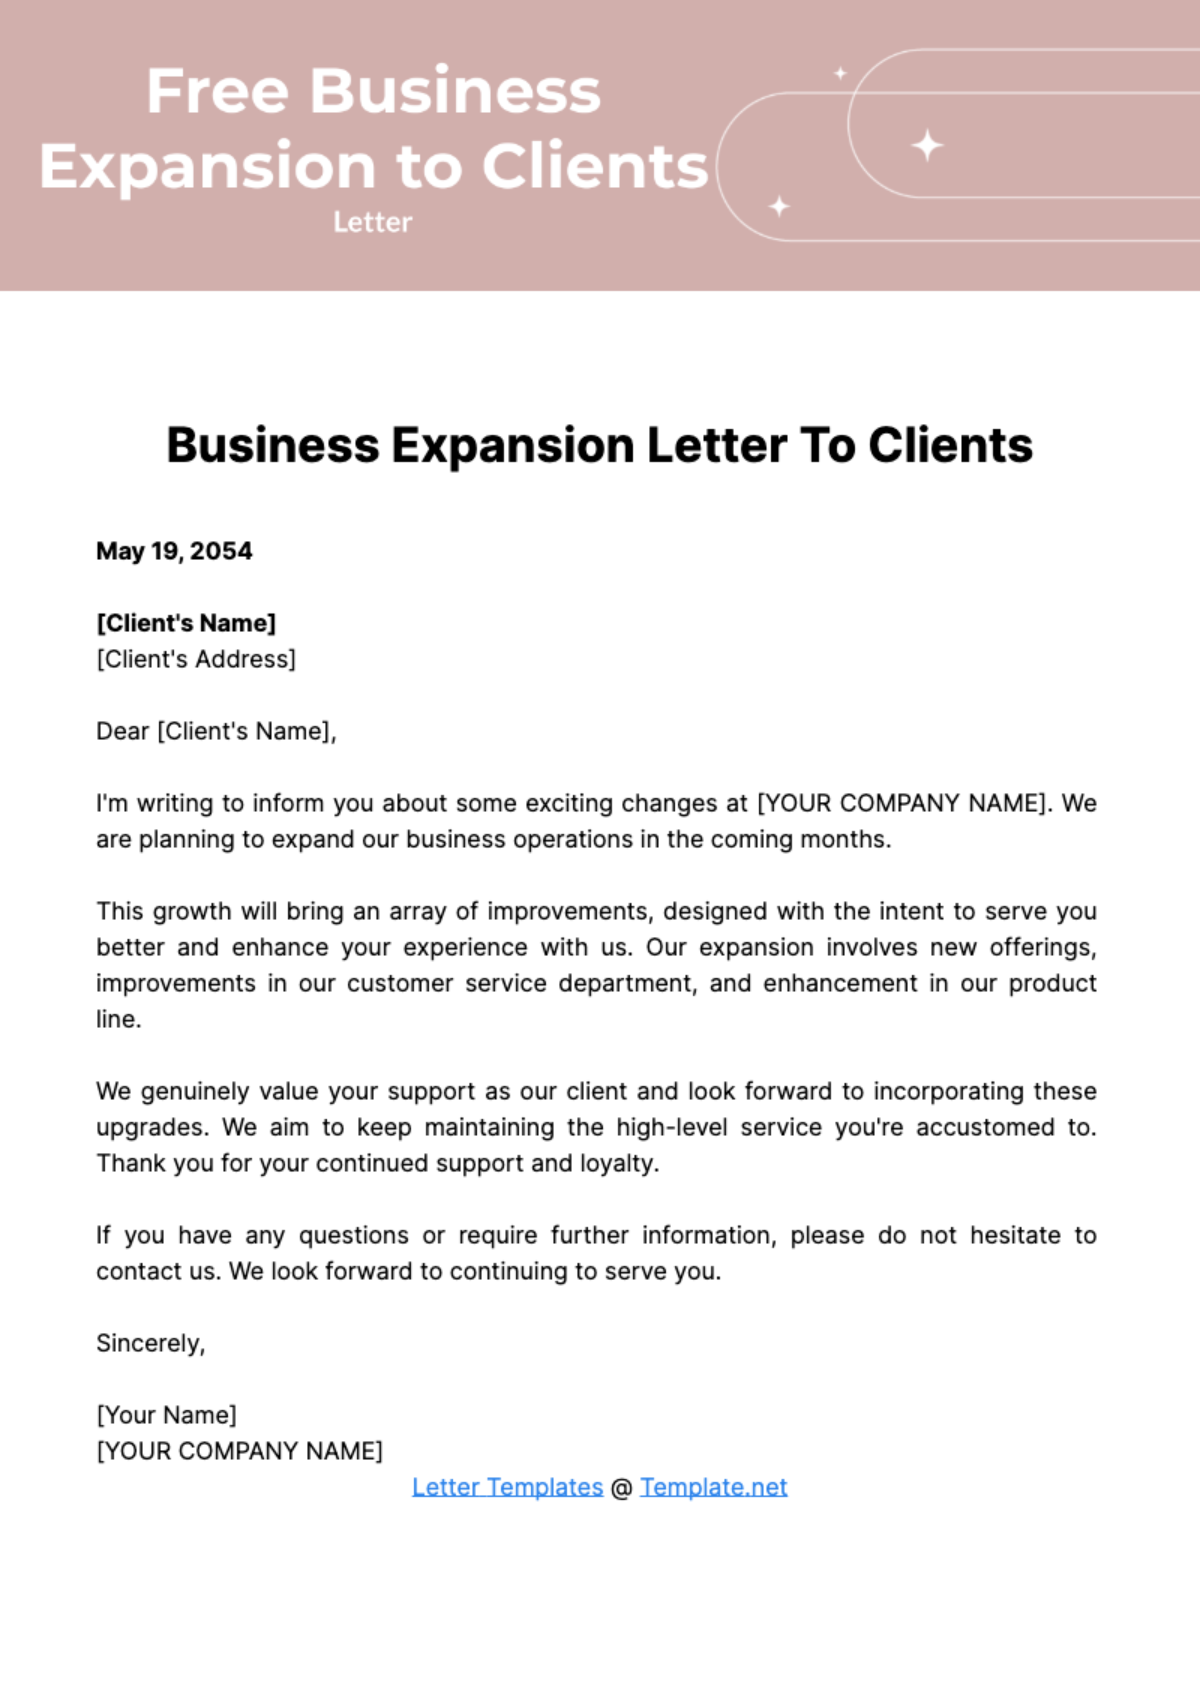 Business Expansion Letter to Clients Template